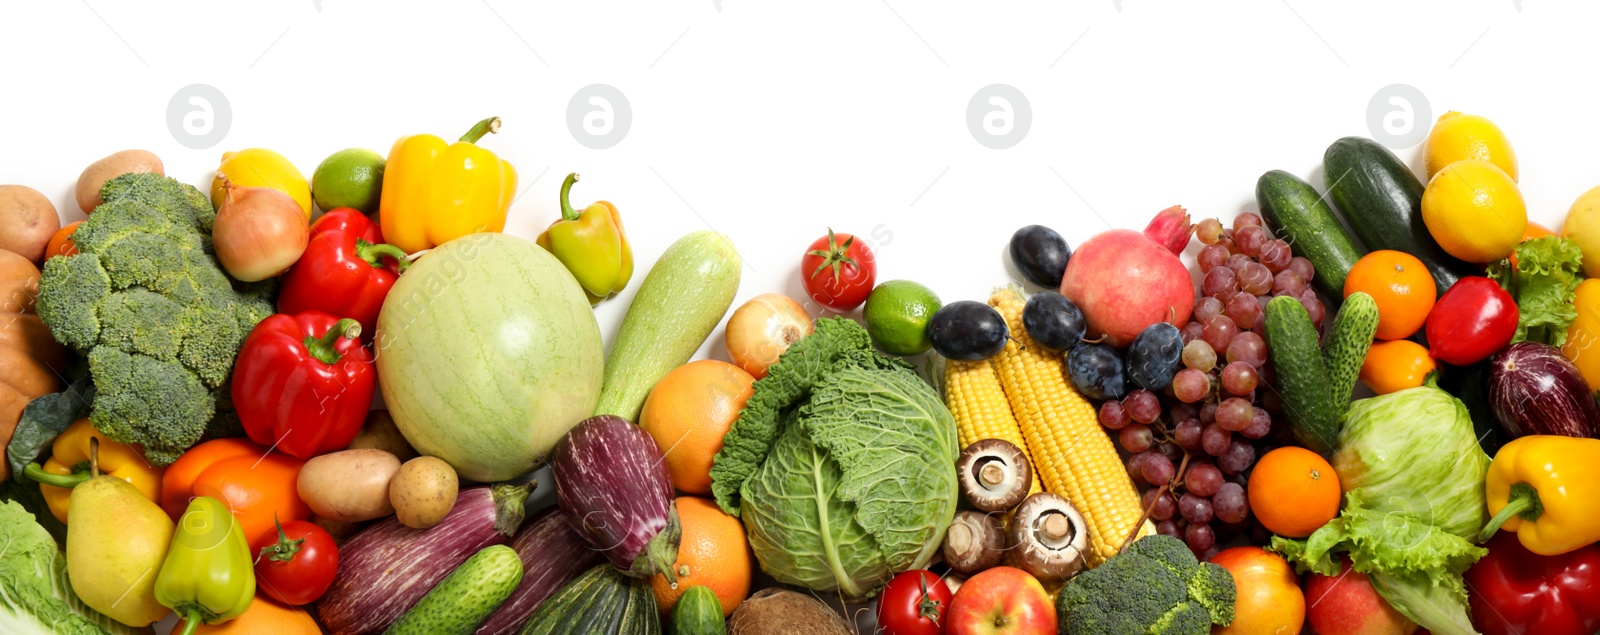 Photo of Assortment of fresh organic fruits and vegetables on white background, top view